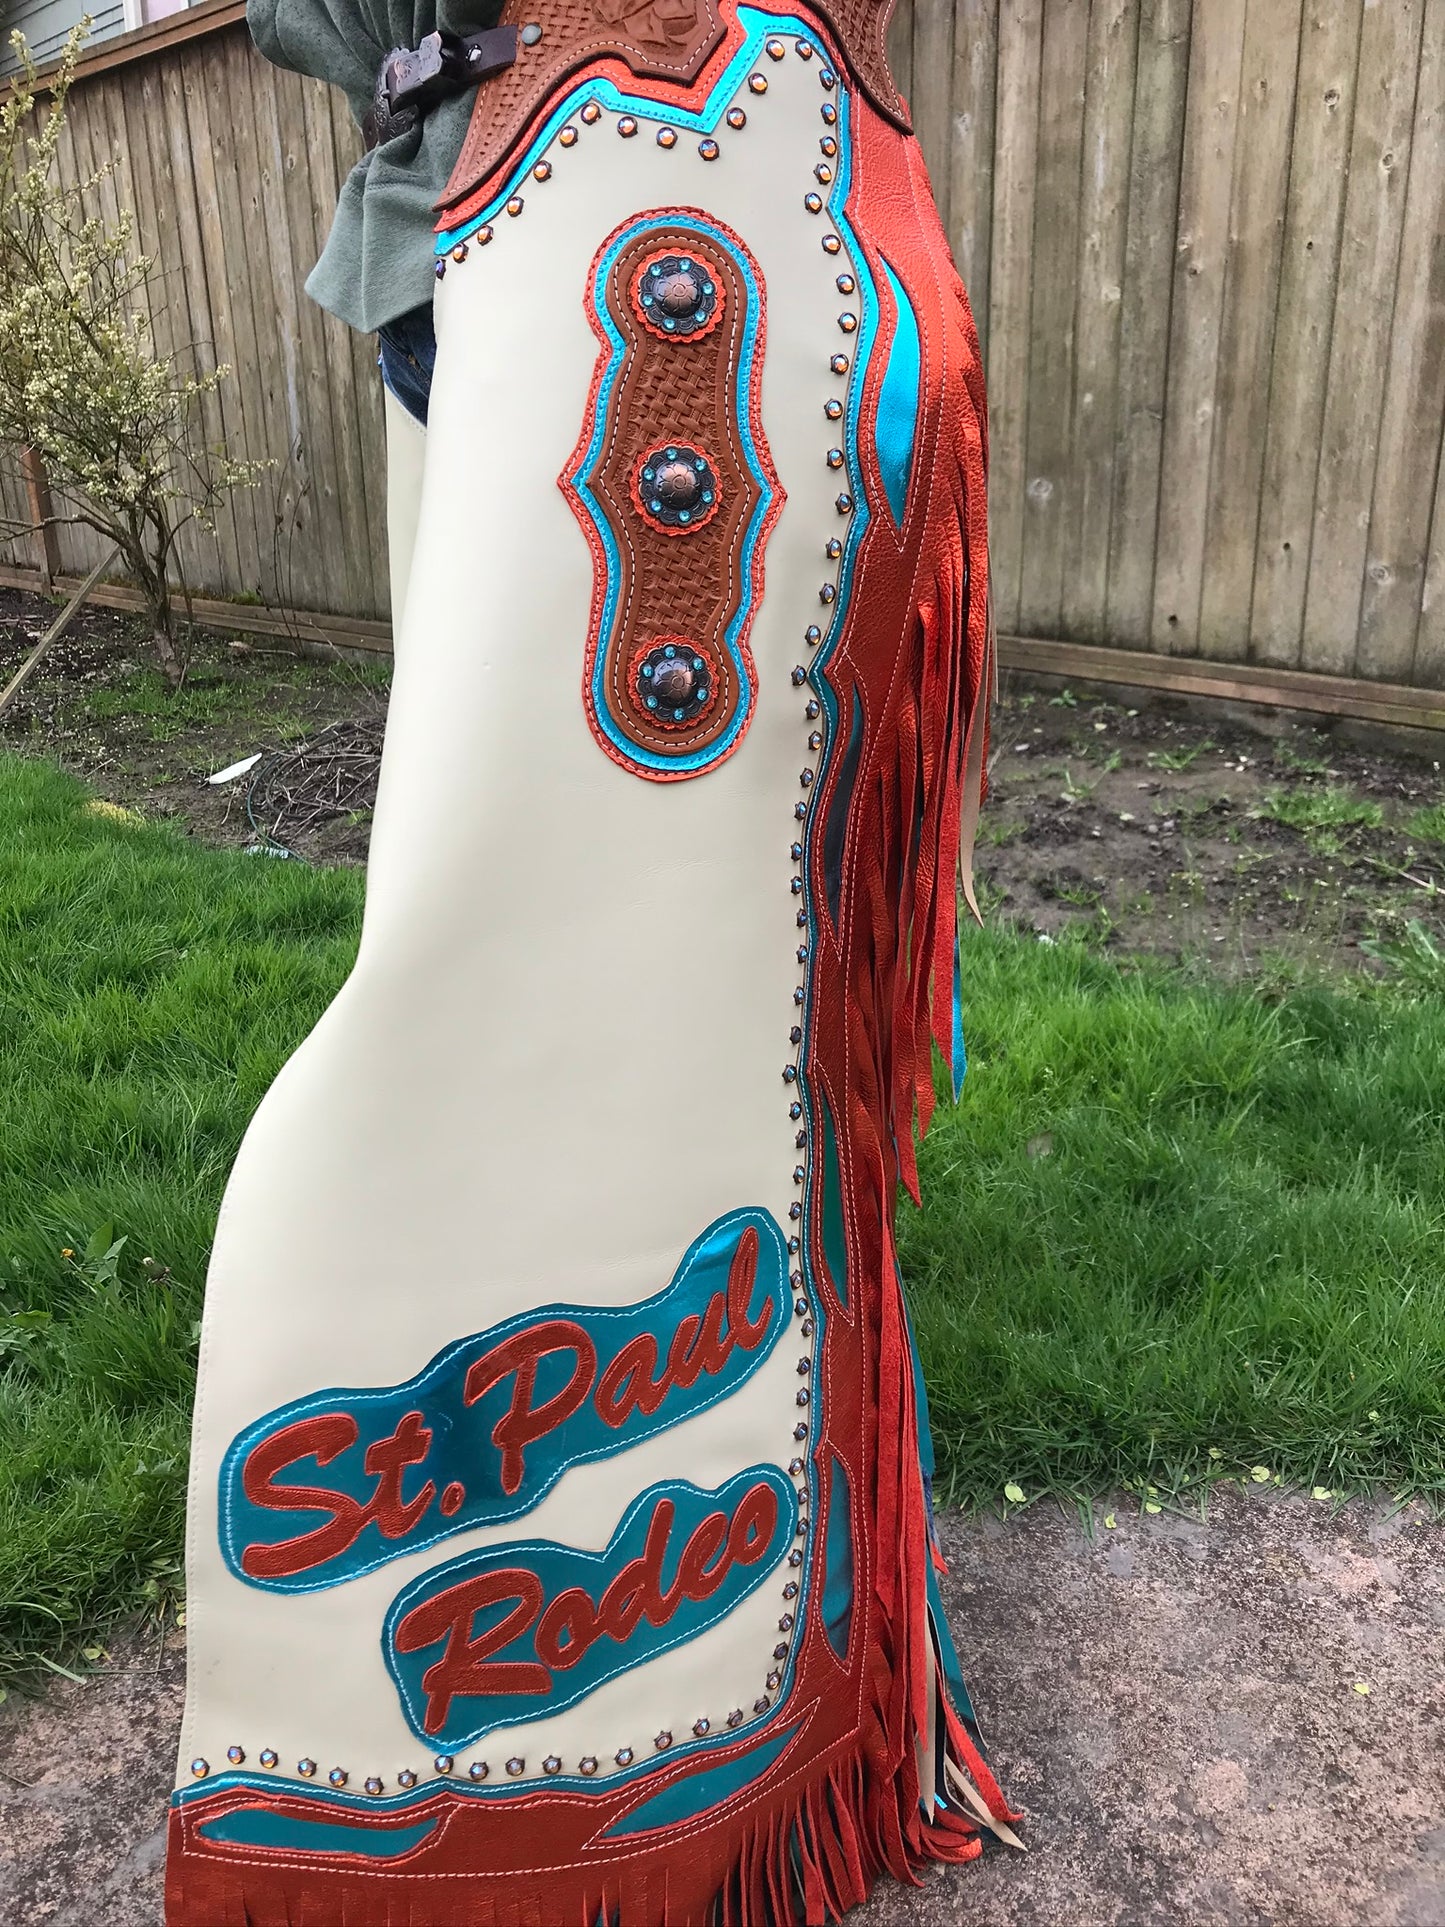 Custom Order Chaps-Please contact us to place your order - Pistol Annie's Boutique